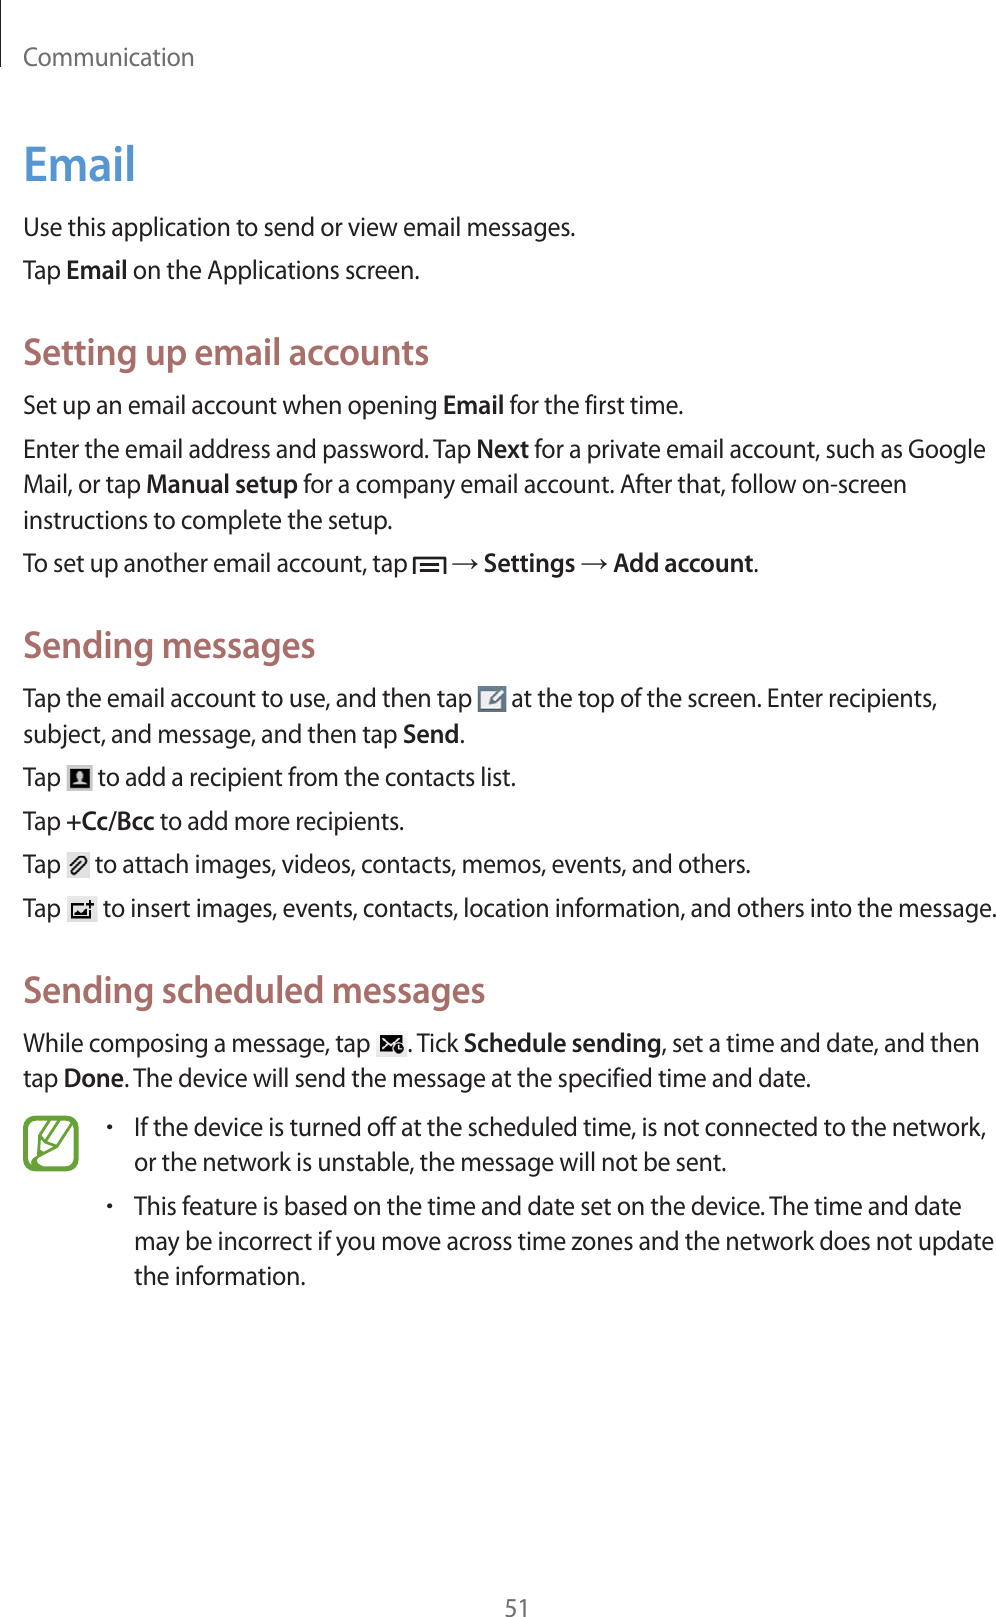 Communication51EmailUse this application to send or view email messages.Tap Email on the Applications screen.Setting up email accountsSet up an email account when opening Email for the first time.Enter the email address and password. Tap Next for a private email account, such as Google Mail, or tap Manual setup for a company email account. After that, follow on-screen instructions to complete the setup.To set up another email account, tap   ĺ Settings ĺ Add account.Sending messagesTap the email account to use, and then tap   at the top of the screen. Enter recipients, subject, and message, and then tap Send.Tap   to add a recipient from the contacts list.Tap +Cc/Bcc to add more recipients.Tap   to attach images, videos, contacts, memos, events, and others.Tap   to insert images, events, contacts, location information, and others into the message.Sending scheduled messagesWhile composing a message, tap  . Tick Schedule sending, set a time and date, and then tap Done. The device will send the message at the specified time and date.rIf the device is turned off at the scheduled time, is not connected to the network, or the network is unstable, the message will not be sent.rThis feature is based on the time and date set on the device. The time and date may be incorrect if you move across time zones and the network does not update the information.